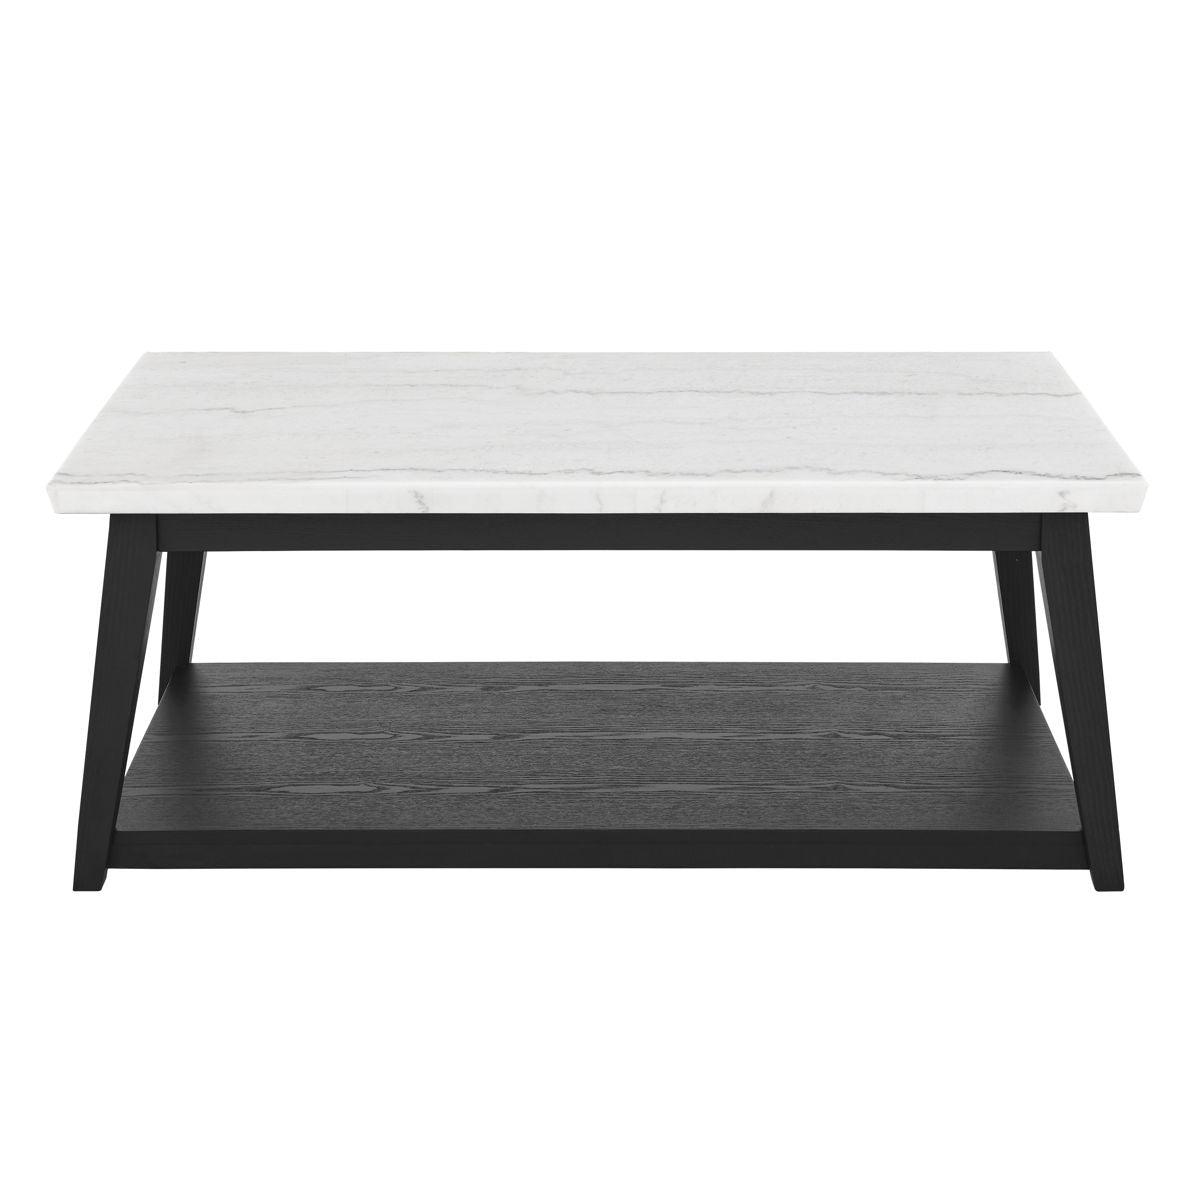 Steve Silver Furniture - Vida - Marble Cocktail Table With Casters - Black / White - 5th Avenue Furniture